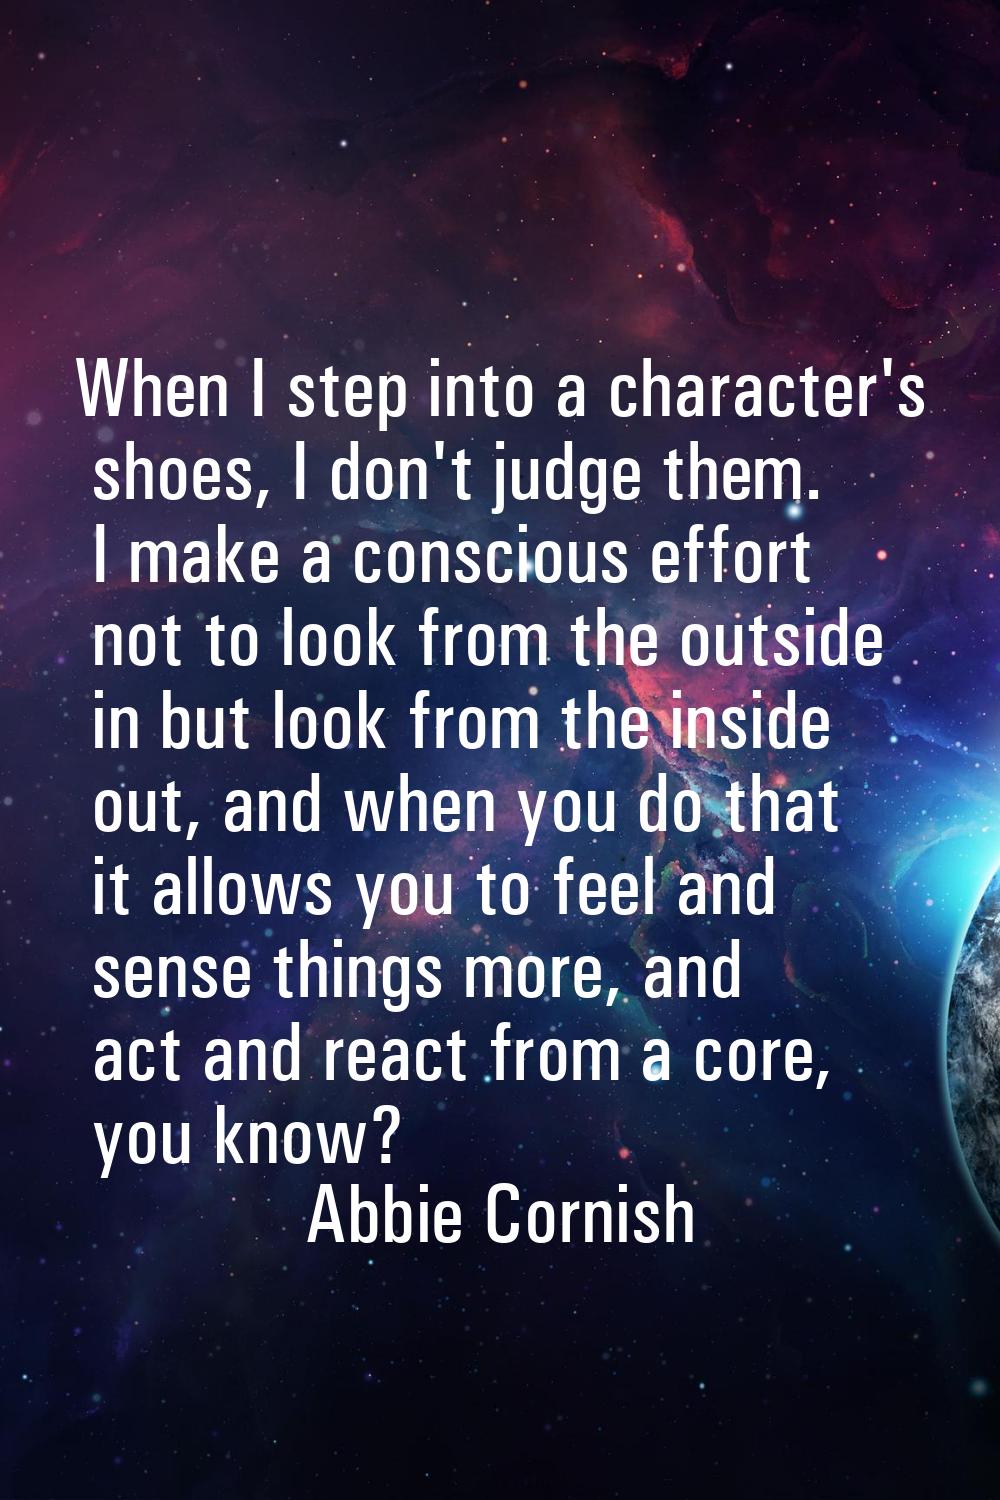 When I step into a character's shoes, I don't judge them. I make a conscious effort not to look fro